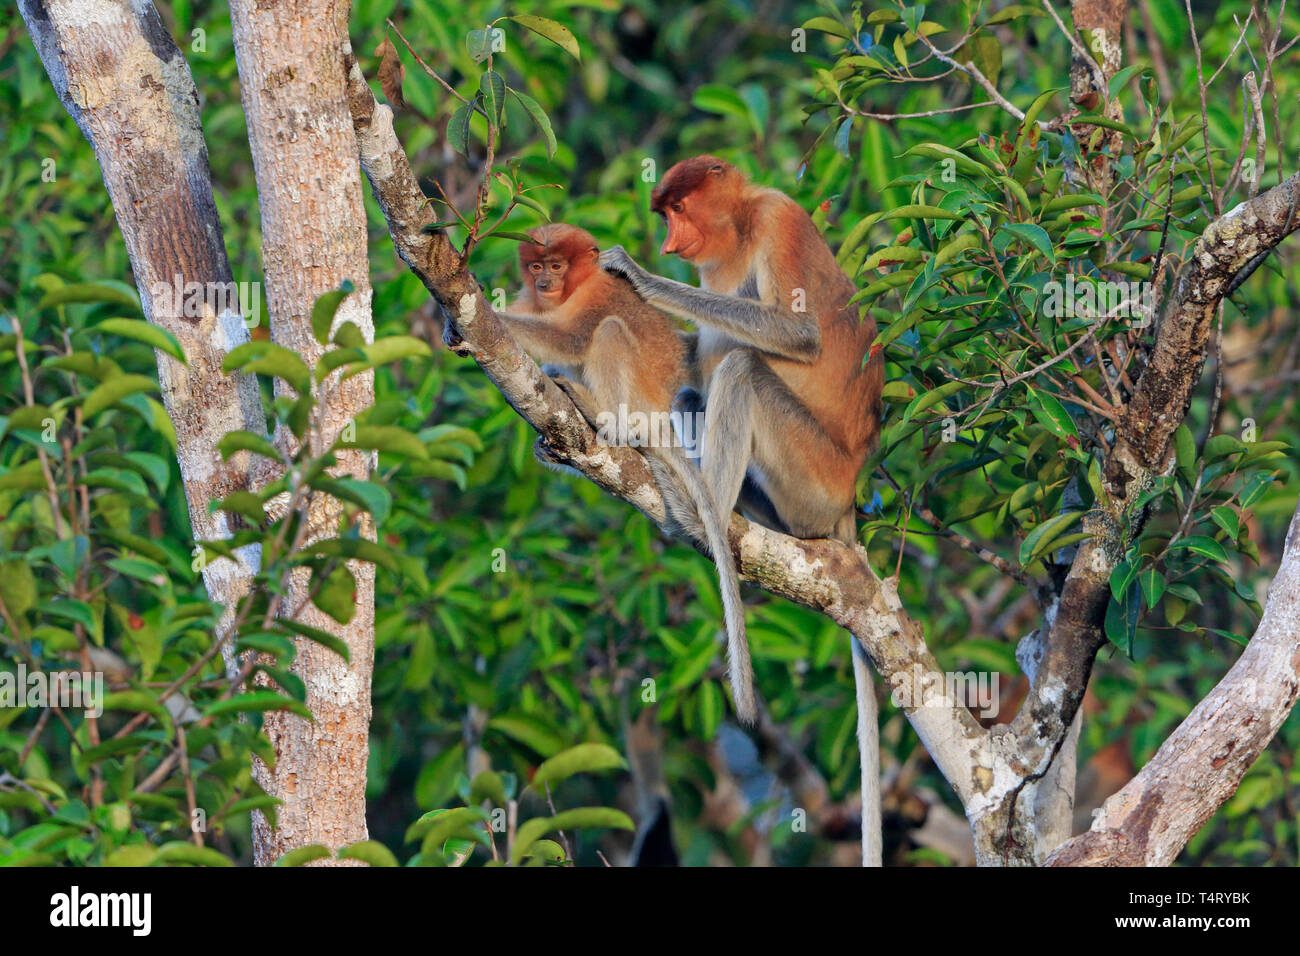 Adult Proboscis Monkey grooming a youngster in Tanjung Putting Nature Reserve Kalimantan Borneo Indonesia Stock Photo